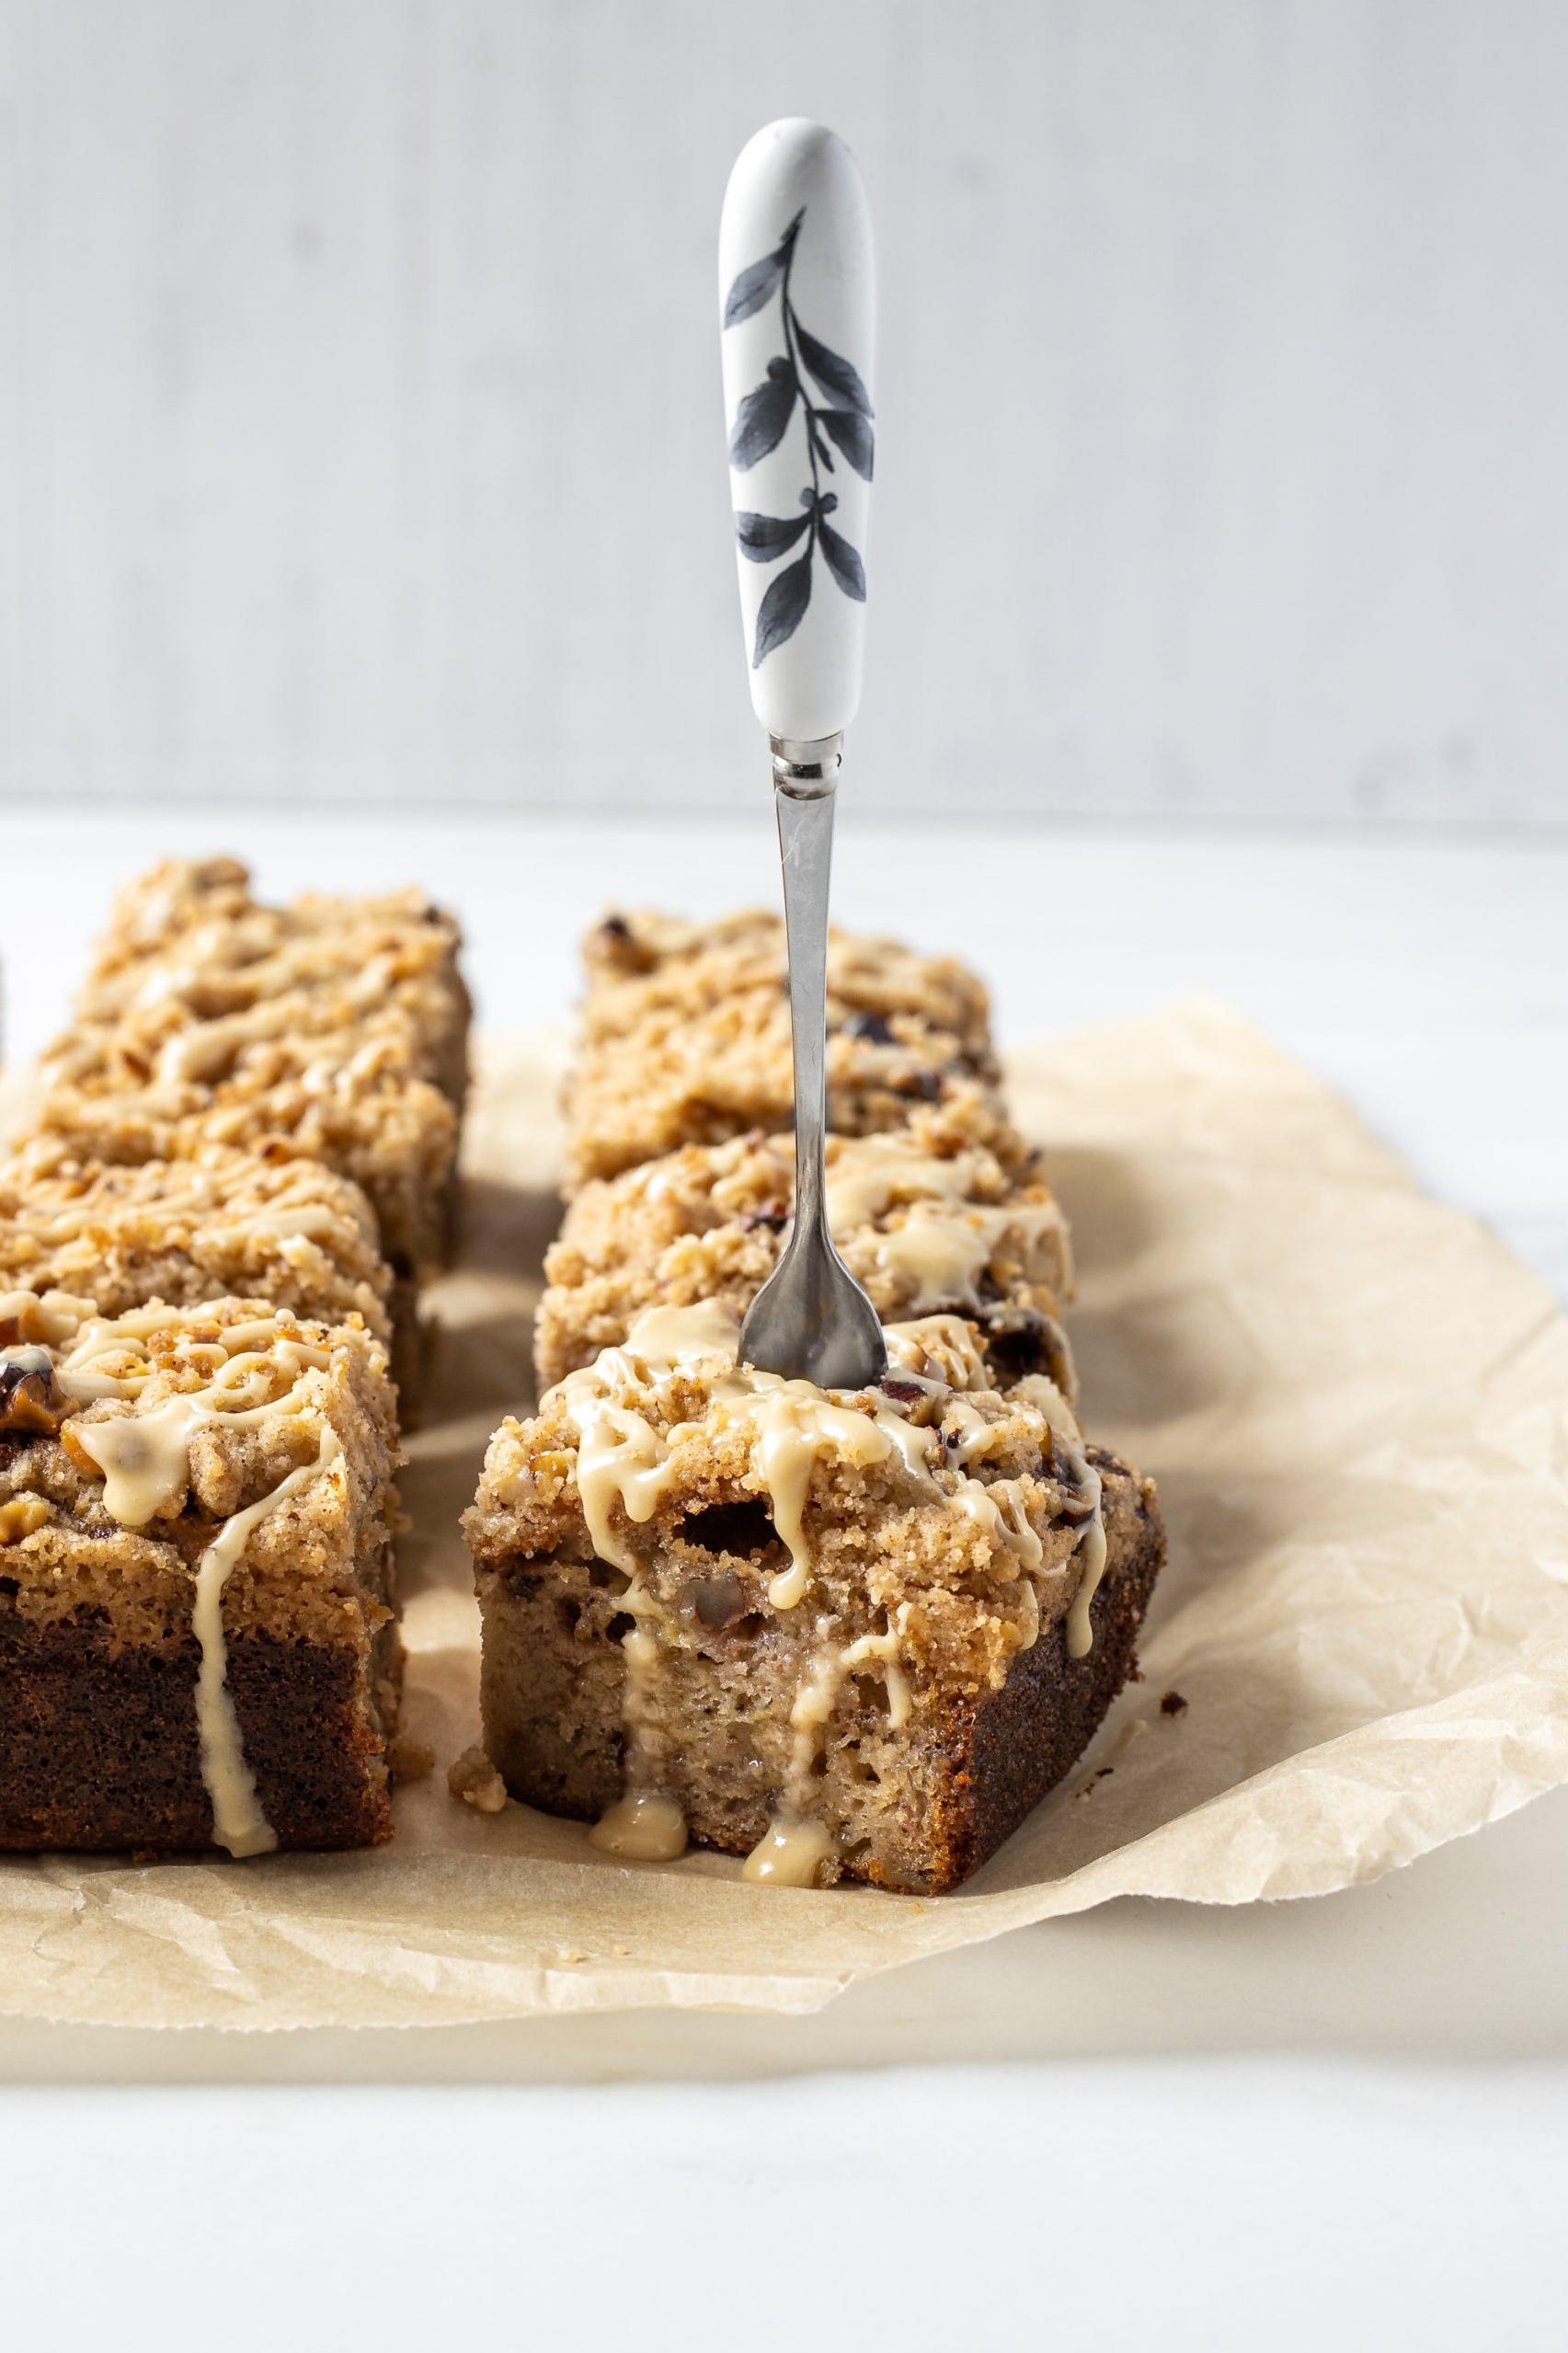  Our secret ingredients? Ripe bananas and crunchy walnuts, of course.